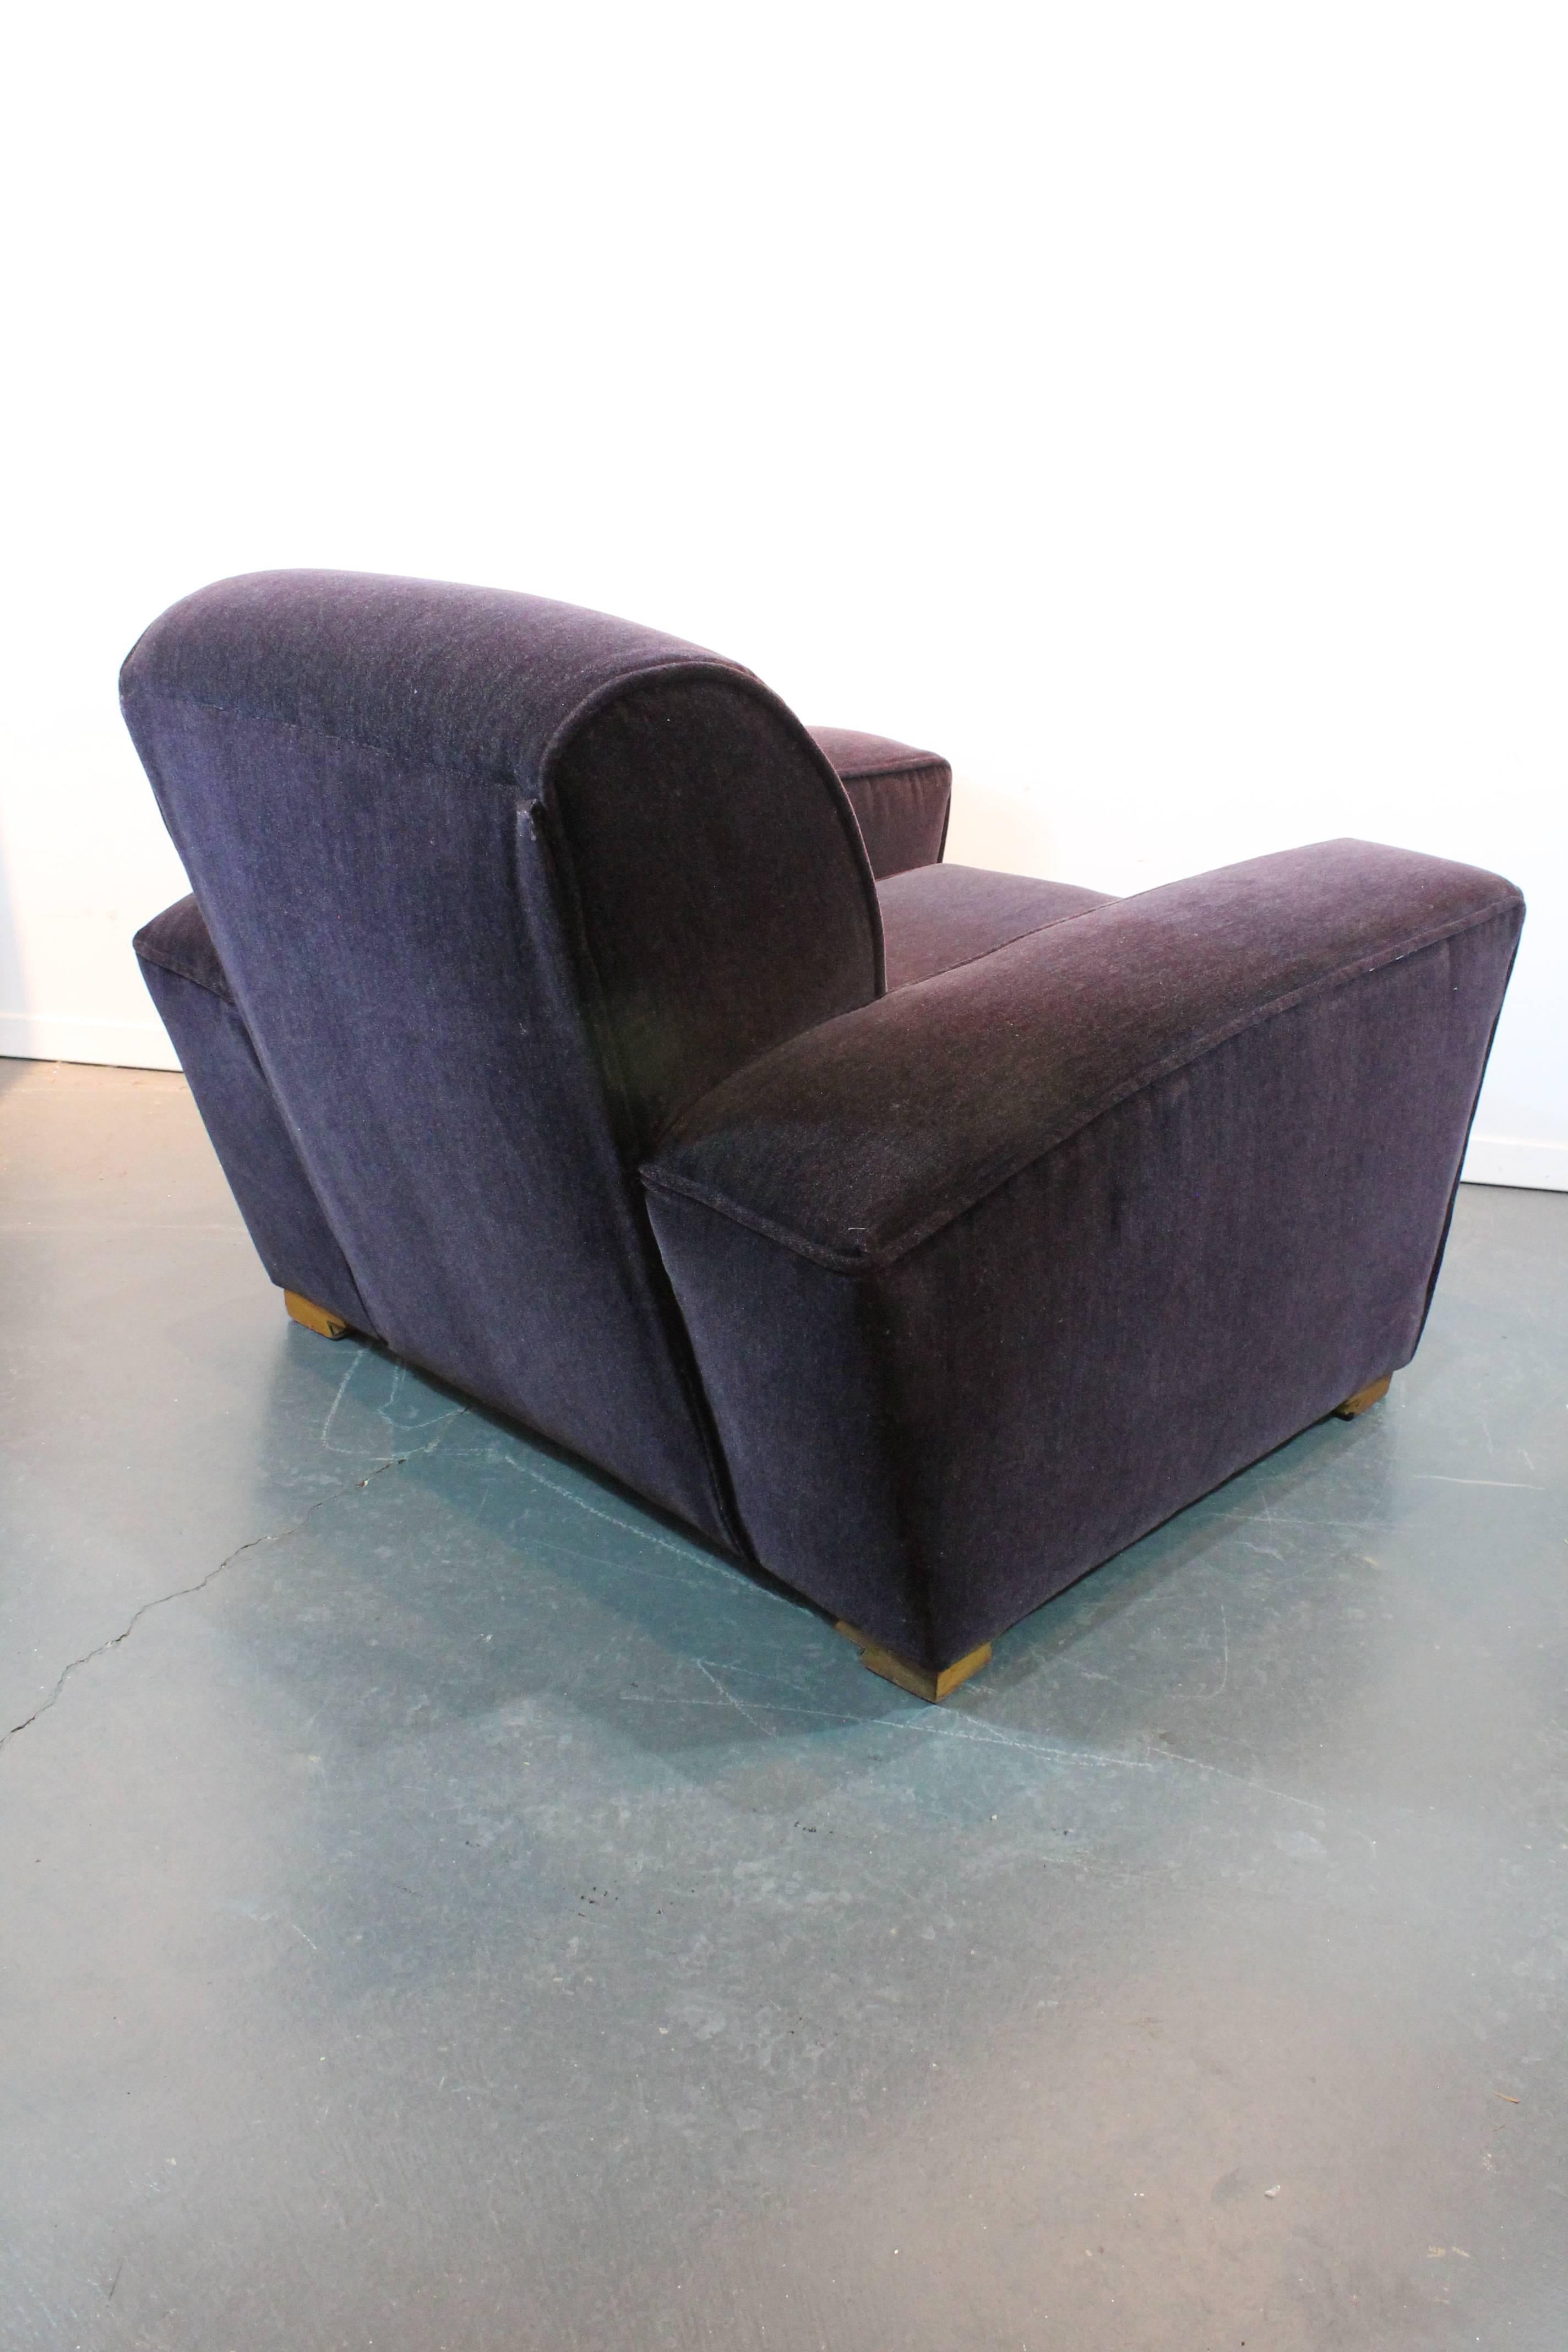 Early 20th Century Art Deco Aubergine Mohair Lounge Chair For Sale